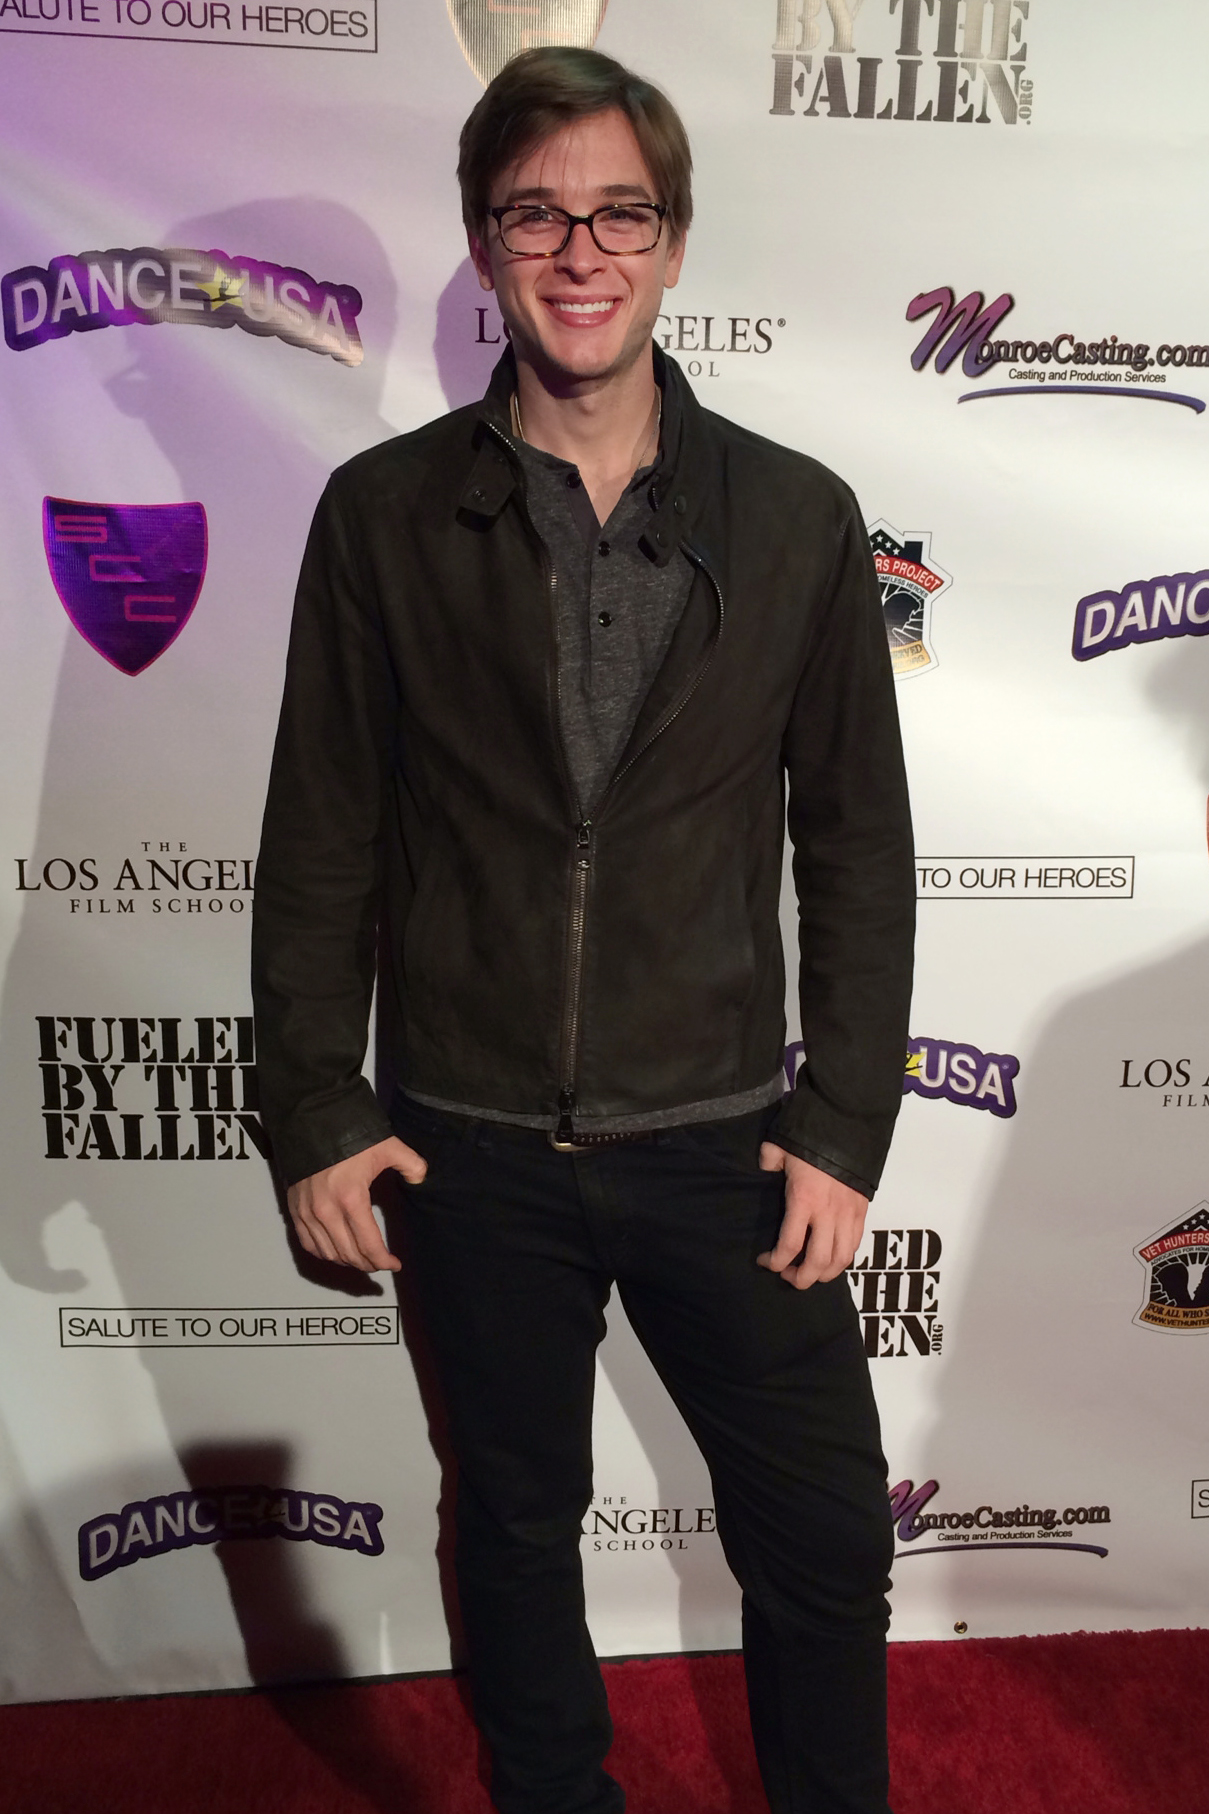 Fueled By The Fallen - Salute To Our Heroes Event - LA - 3/4/2014